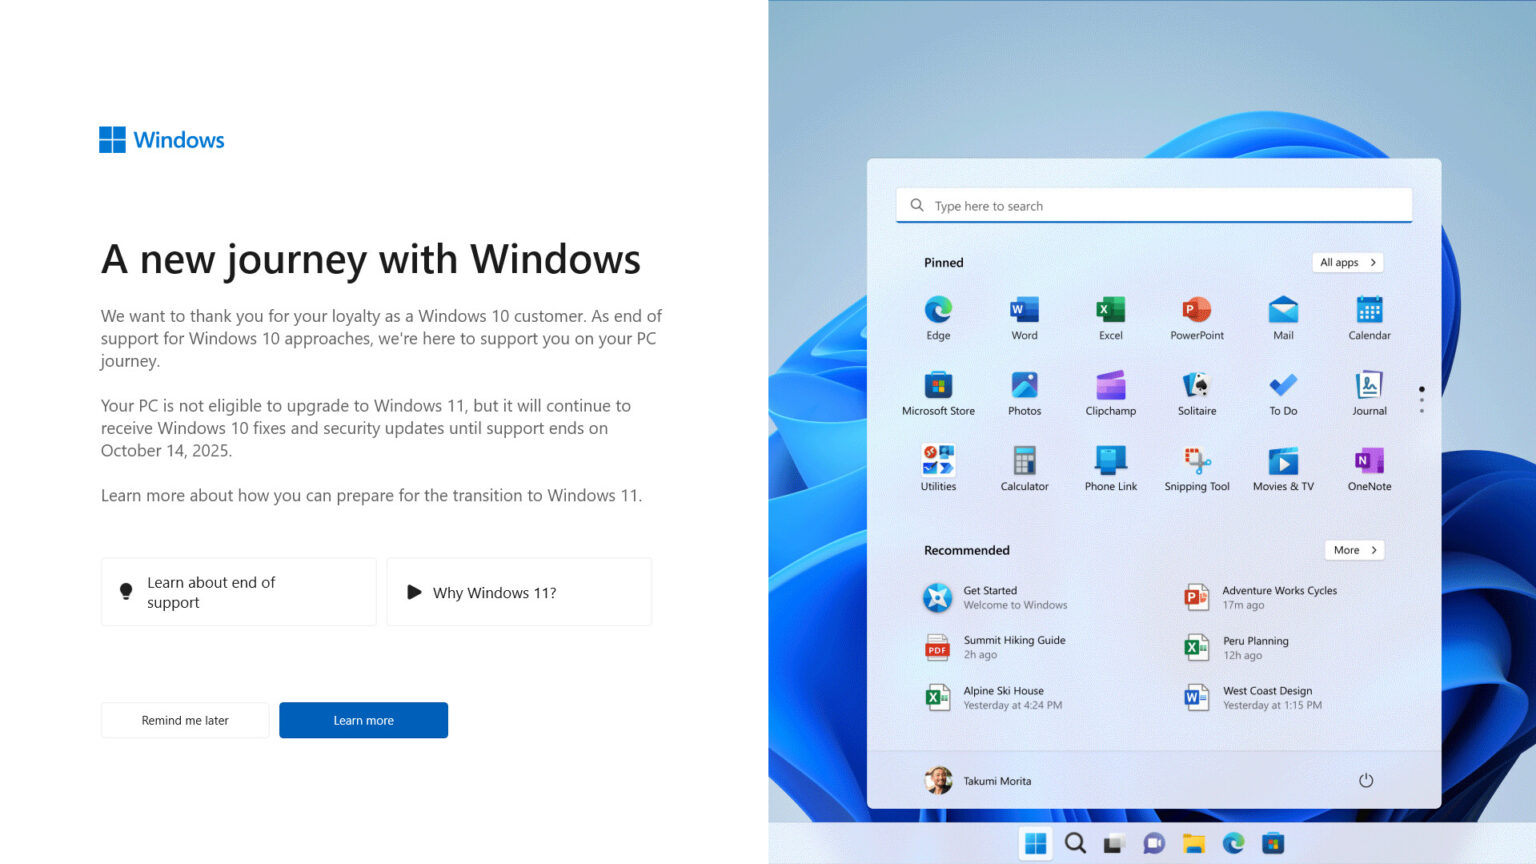 Microsoft sends “end of support” notice to Windows 10 users